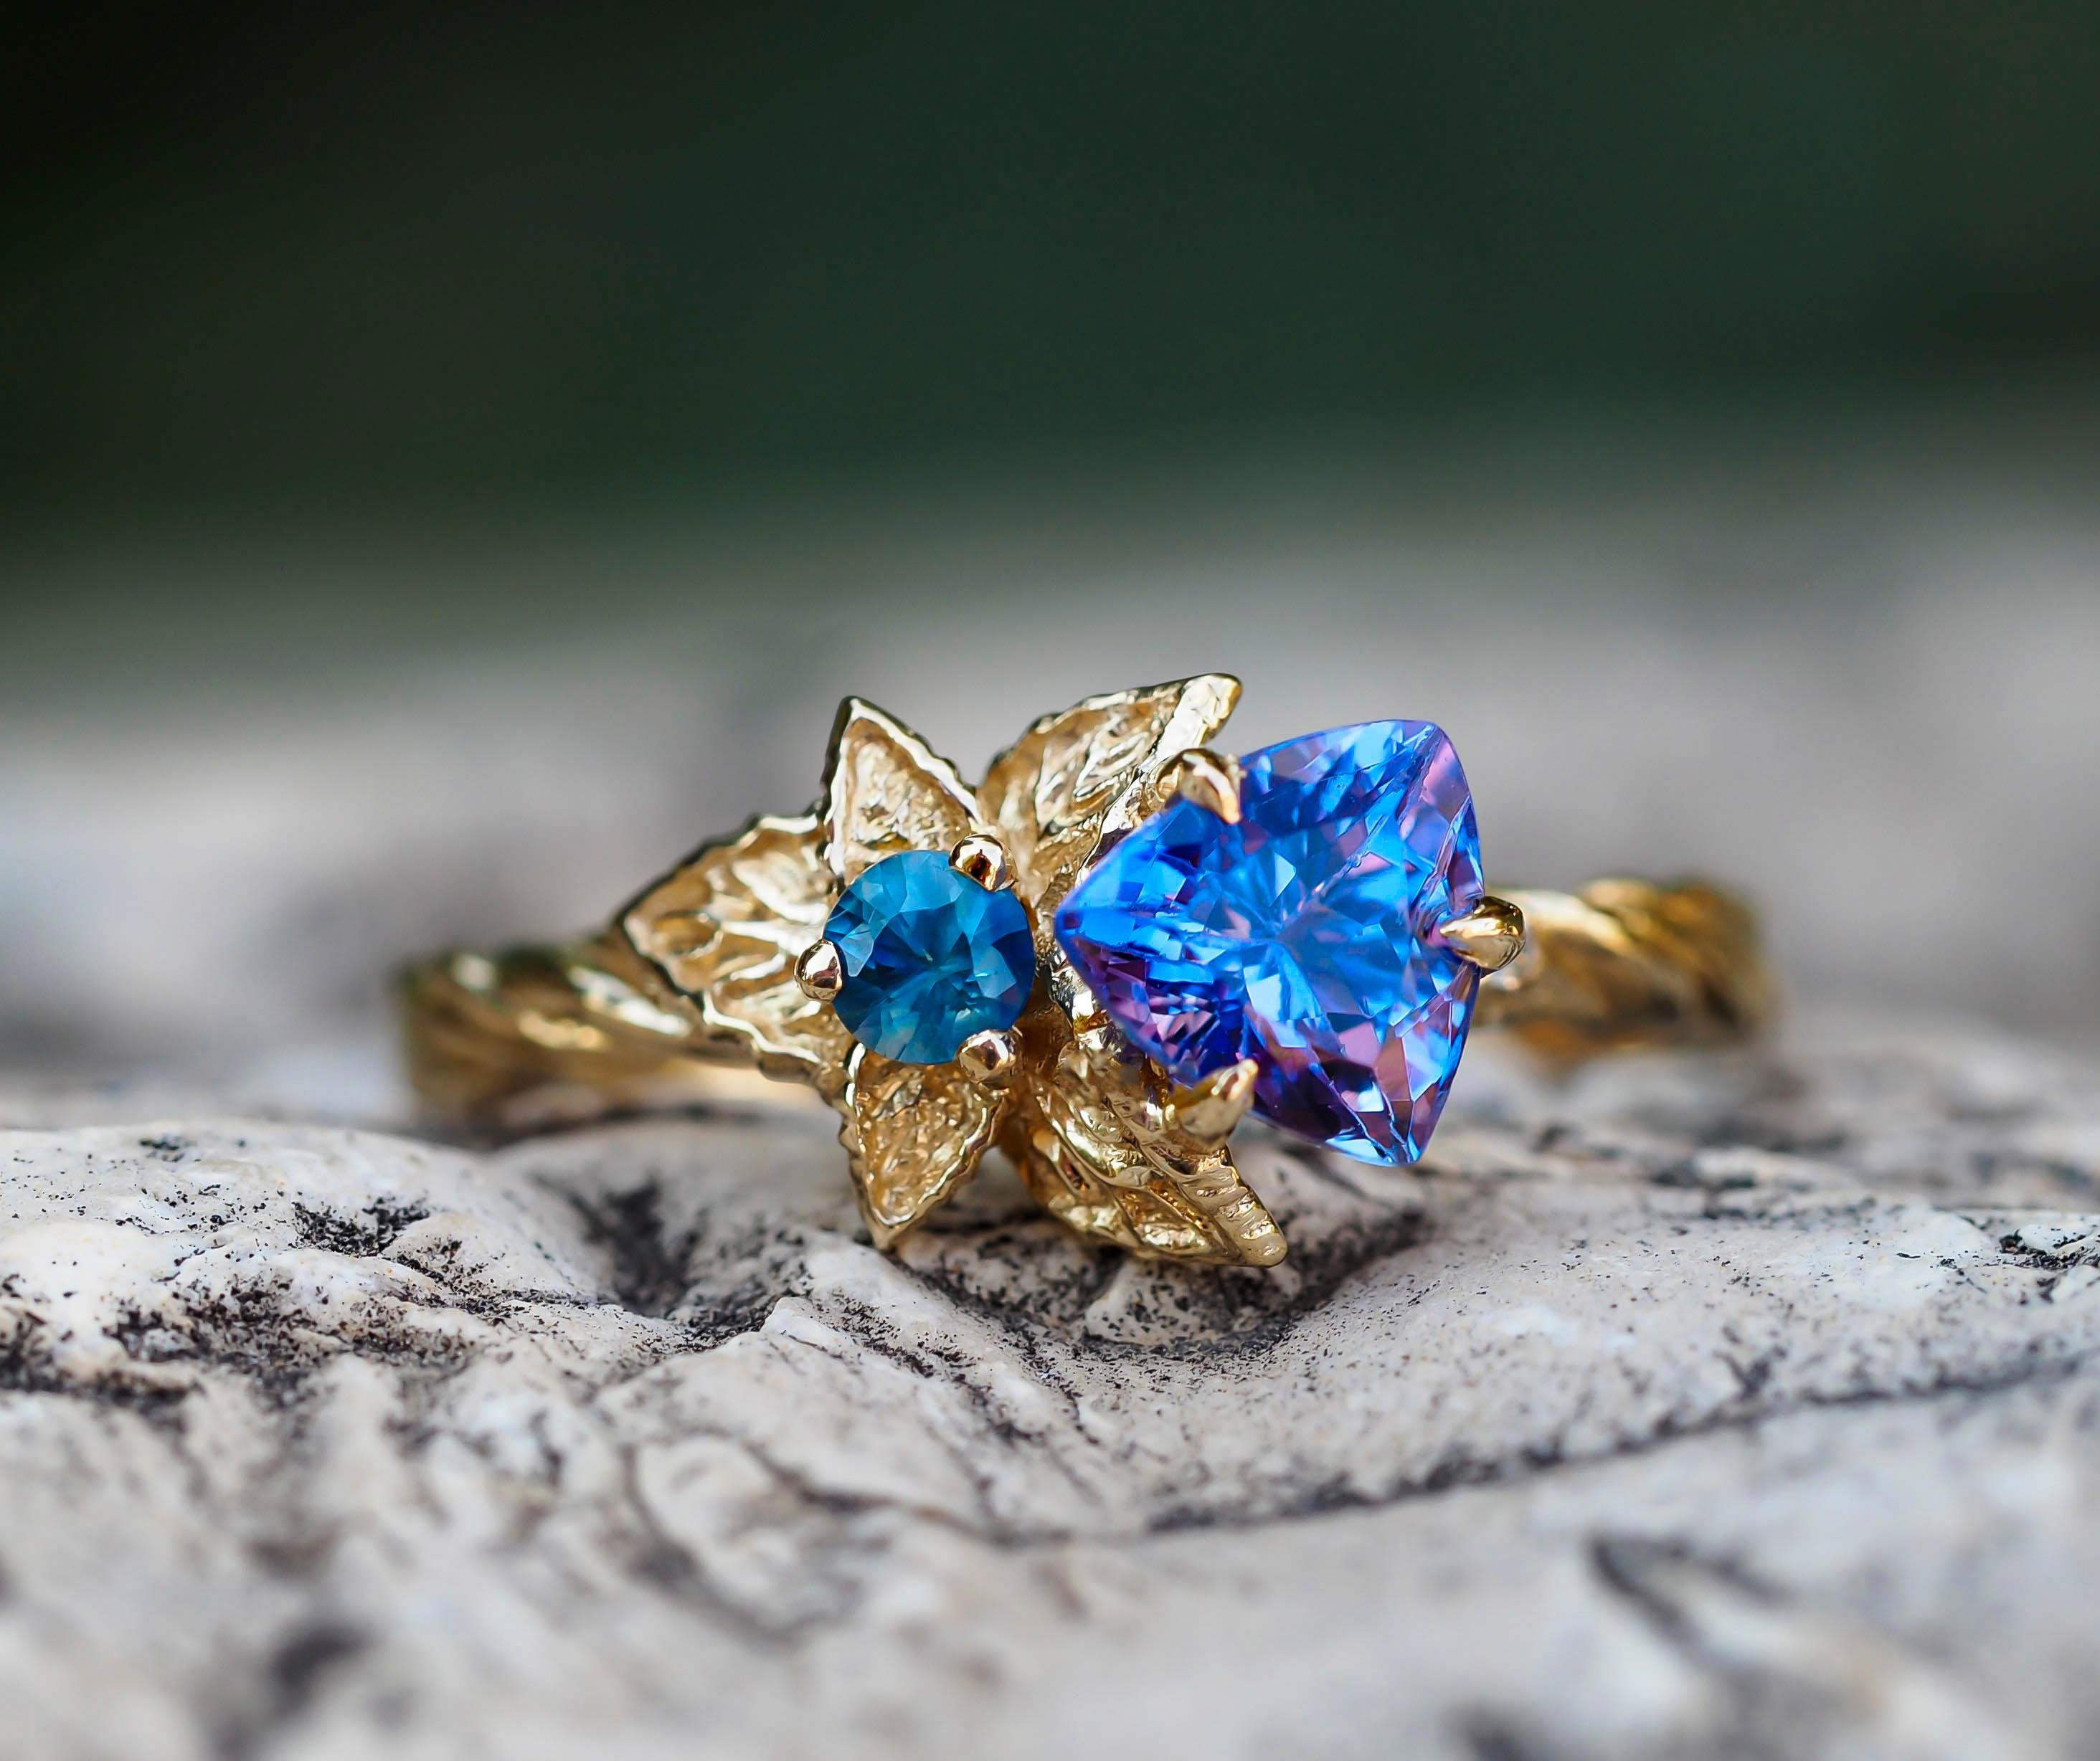 For Sale:  Tanzanite and diamonds 14k gold ring. Flower design ring with tanzanite. 2